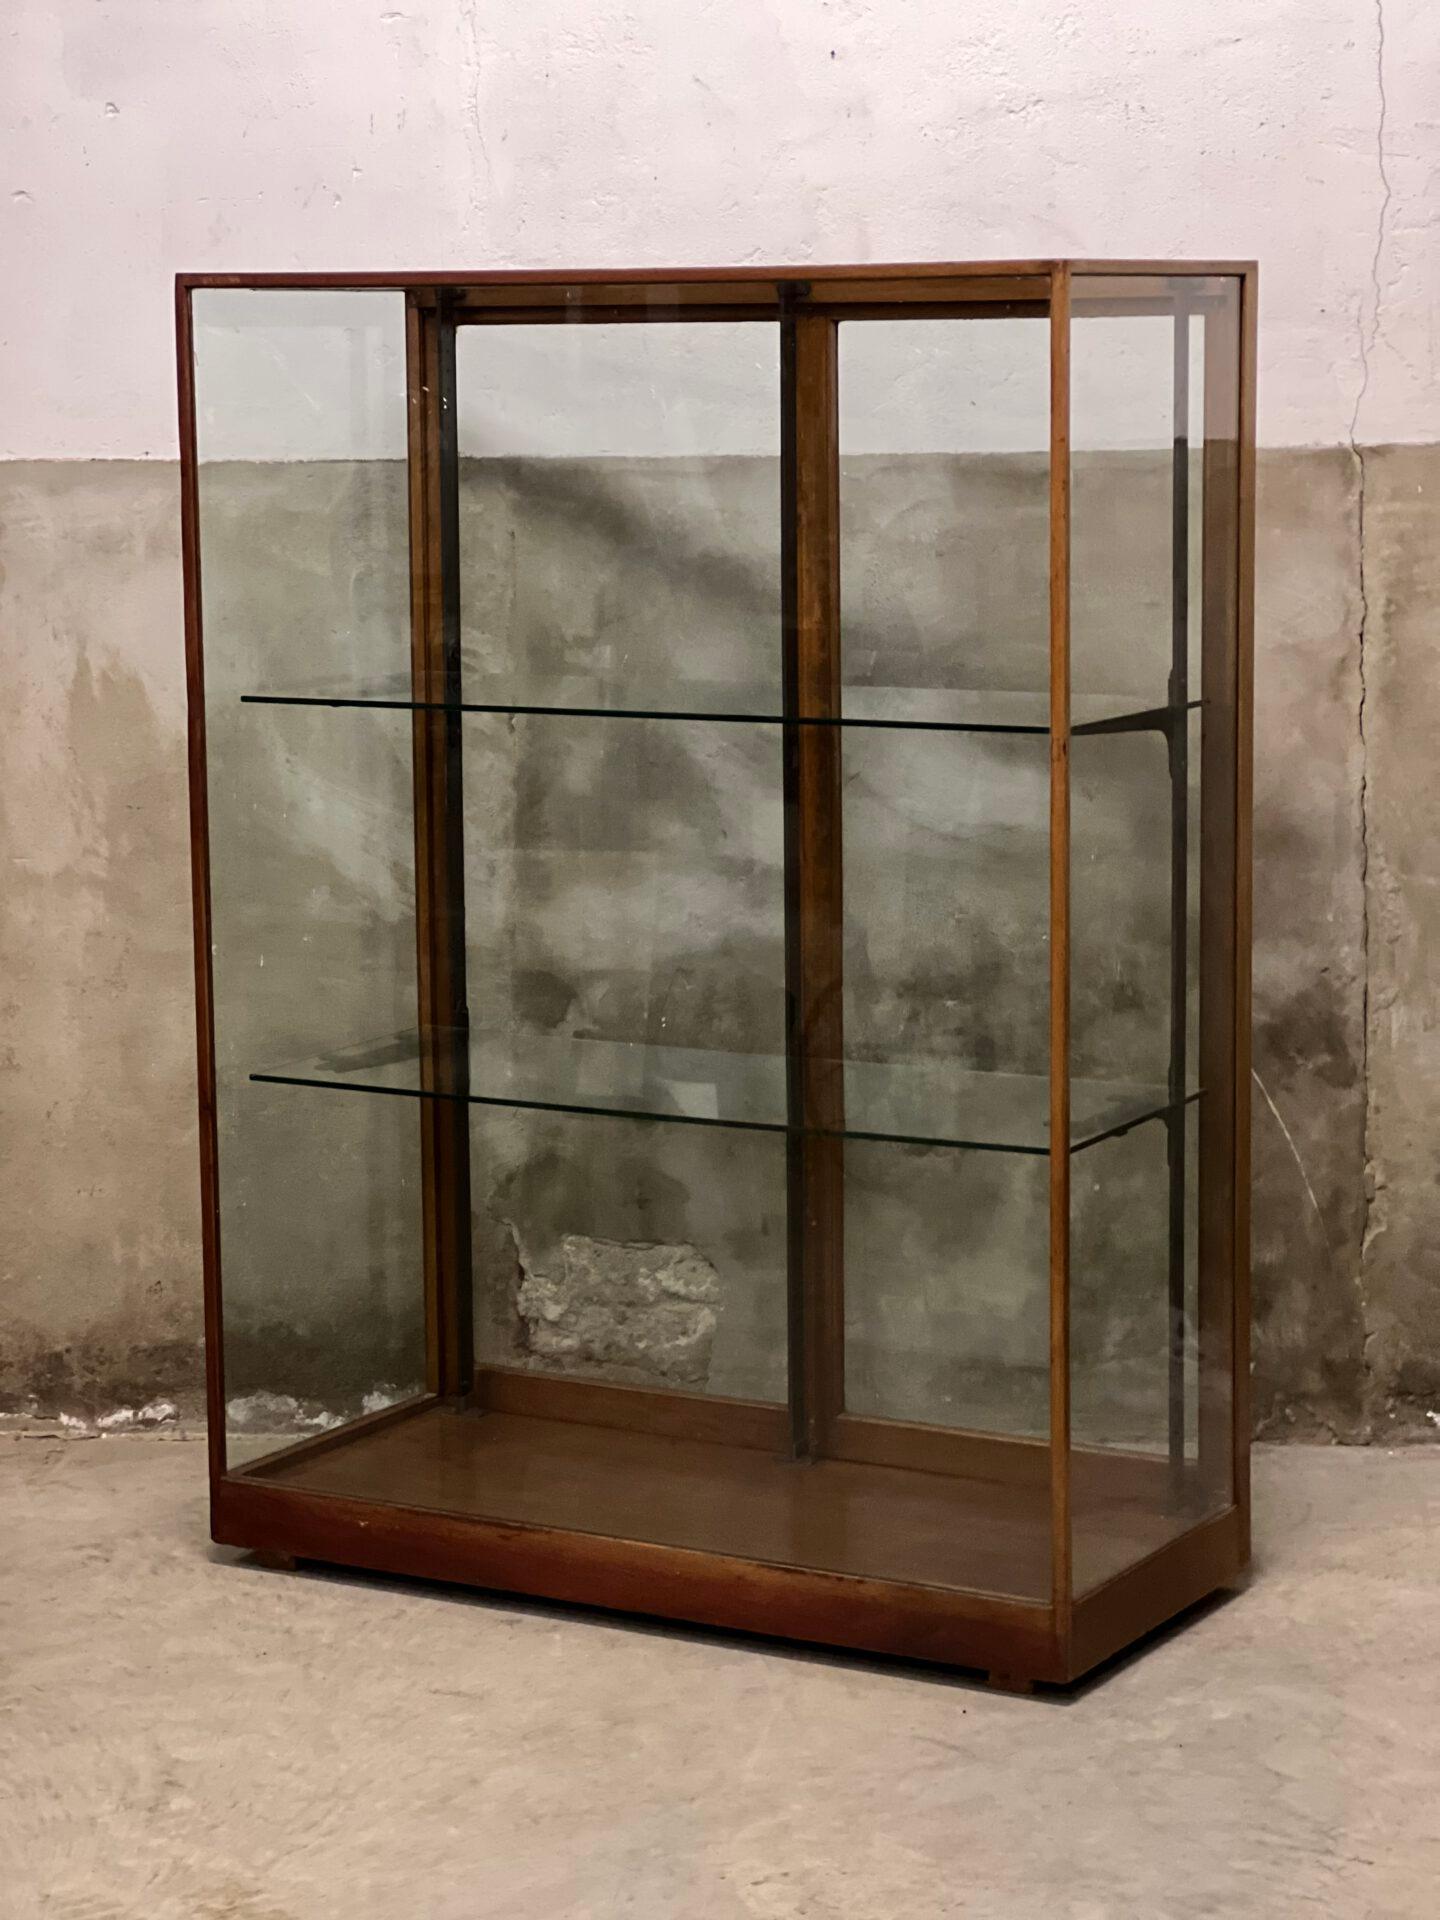 Antique English museum display case, shop display case made of solid mahogany with thick glass and thick glass shelves. In beautiful condition with forged glass carriers and frame. Can have a lot of weight and therefore perfect for displaying your